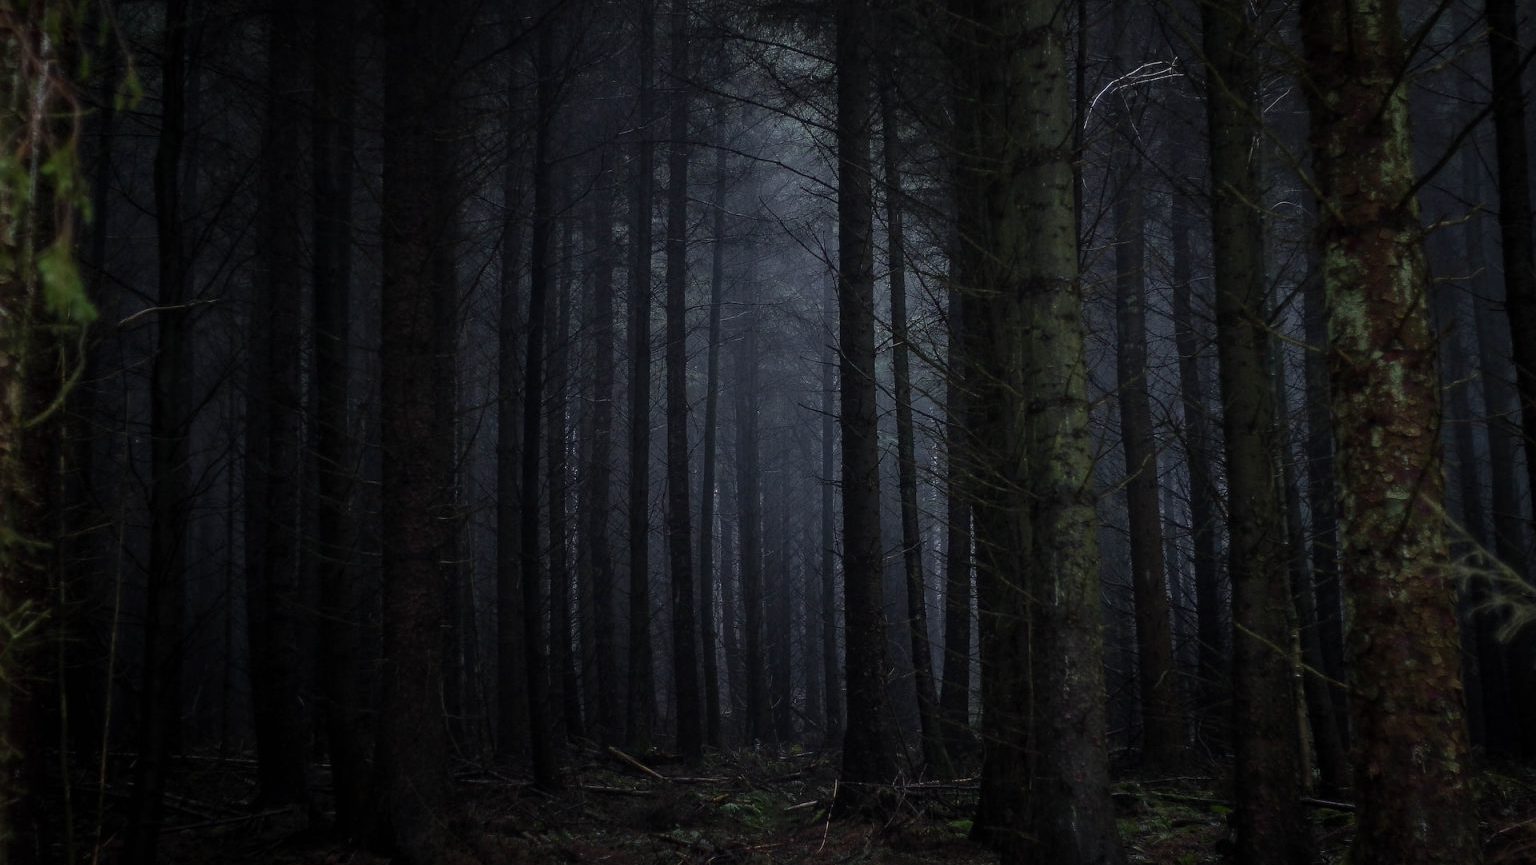 An image of a dark forest at night infused with the mysterious aura of the Bell Witch.